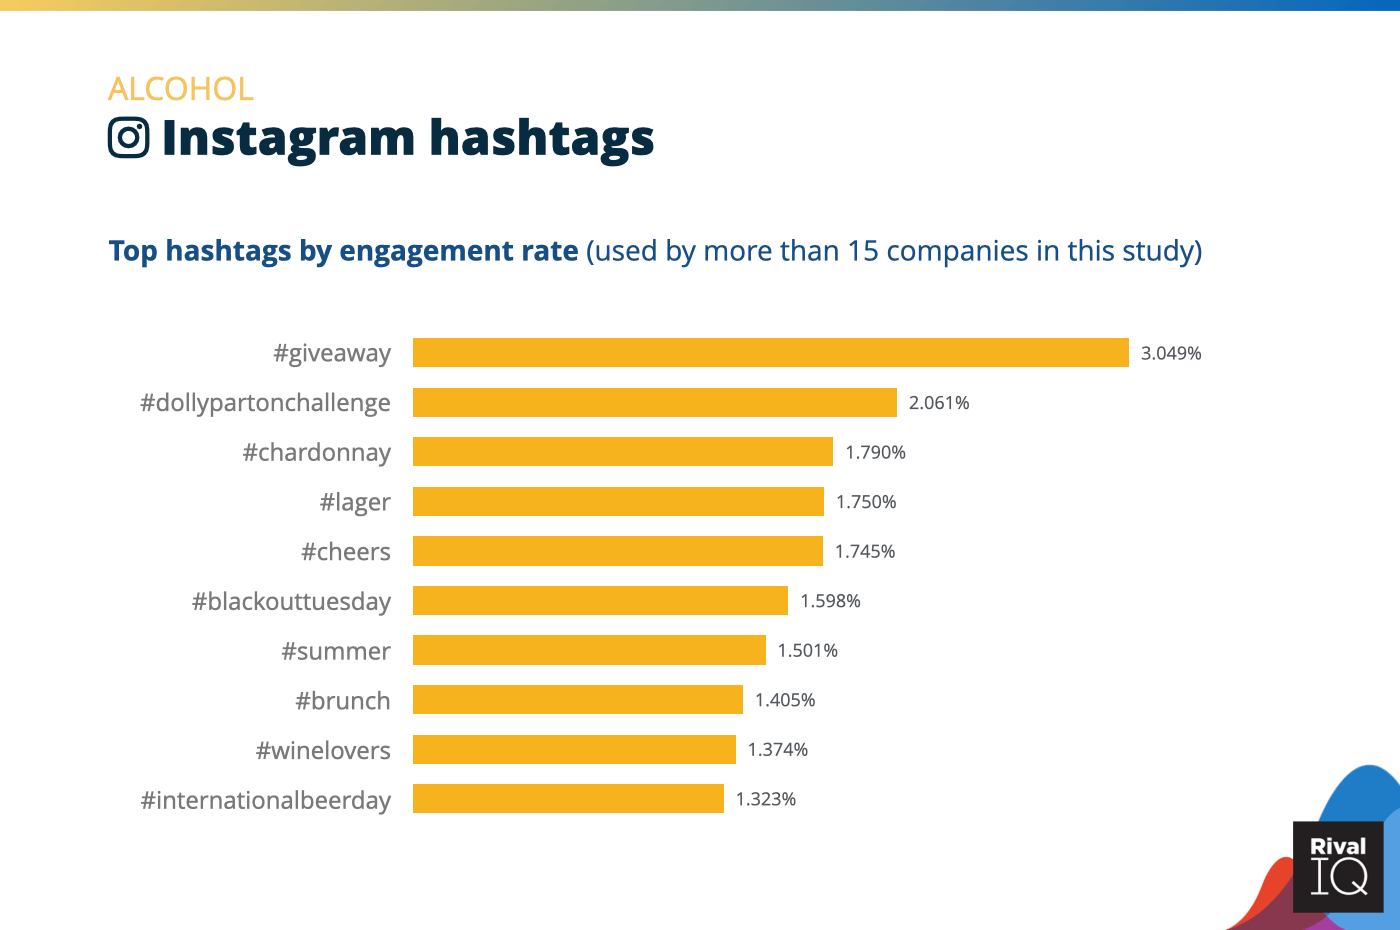 Chart of Top Instagram hashtags by engagement rate, Alcohol